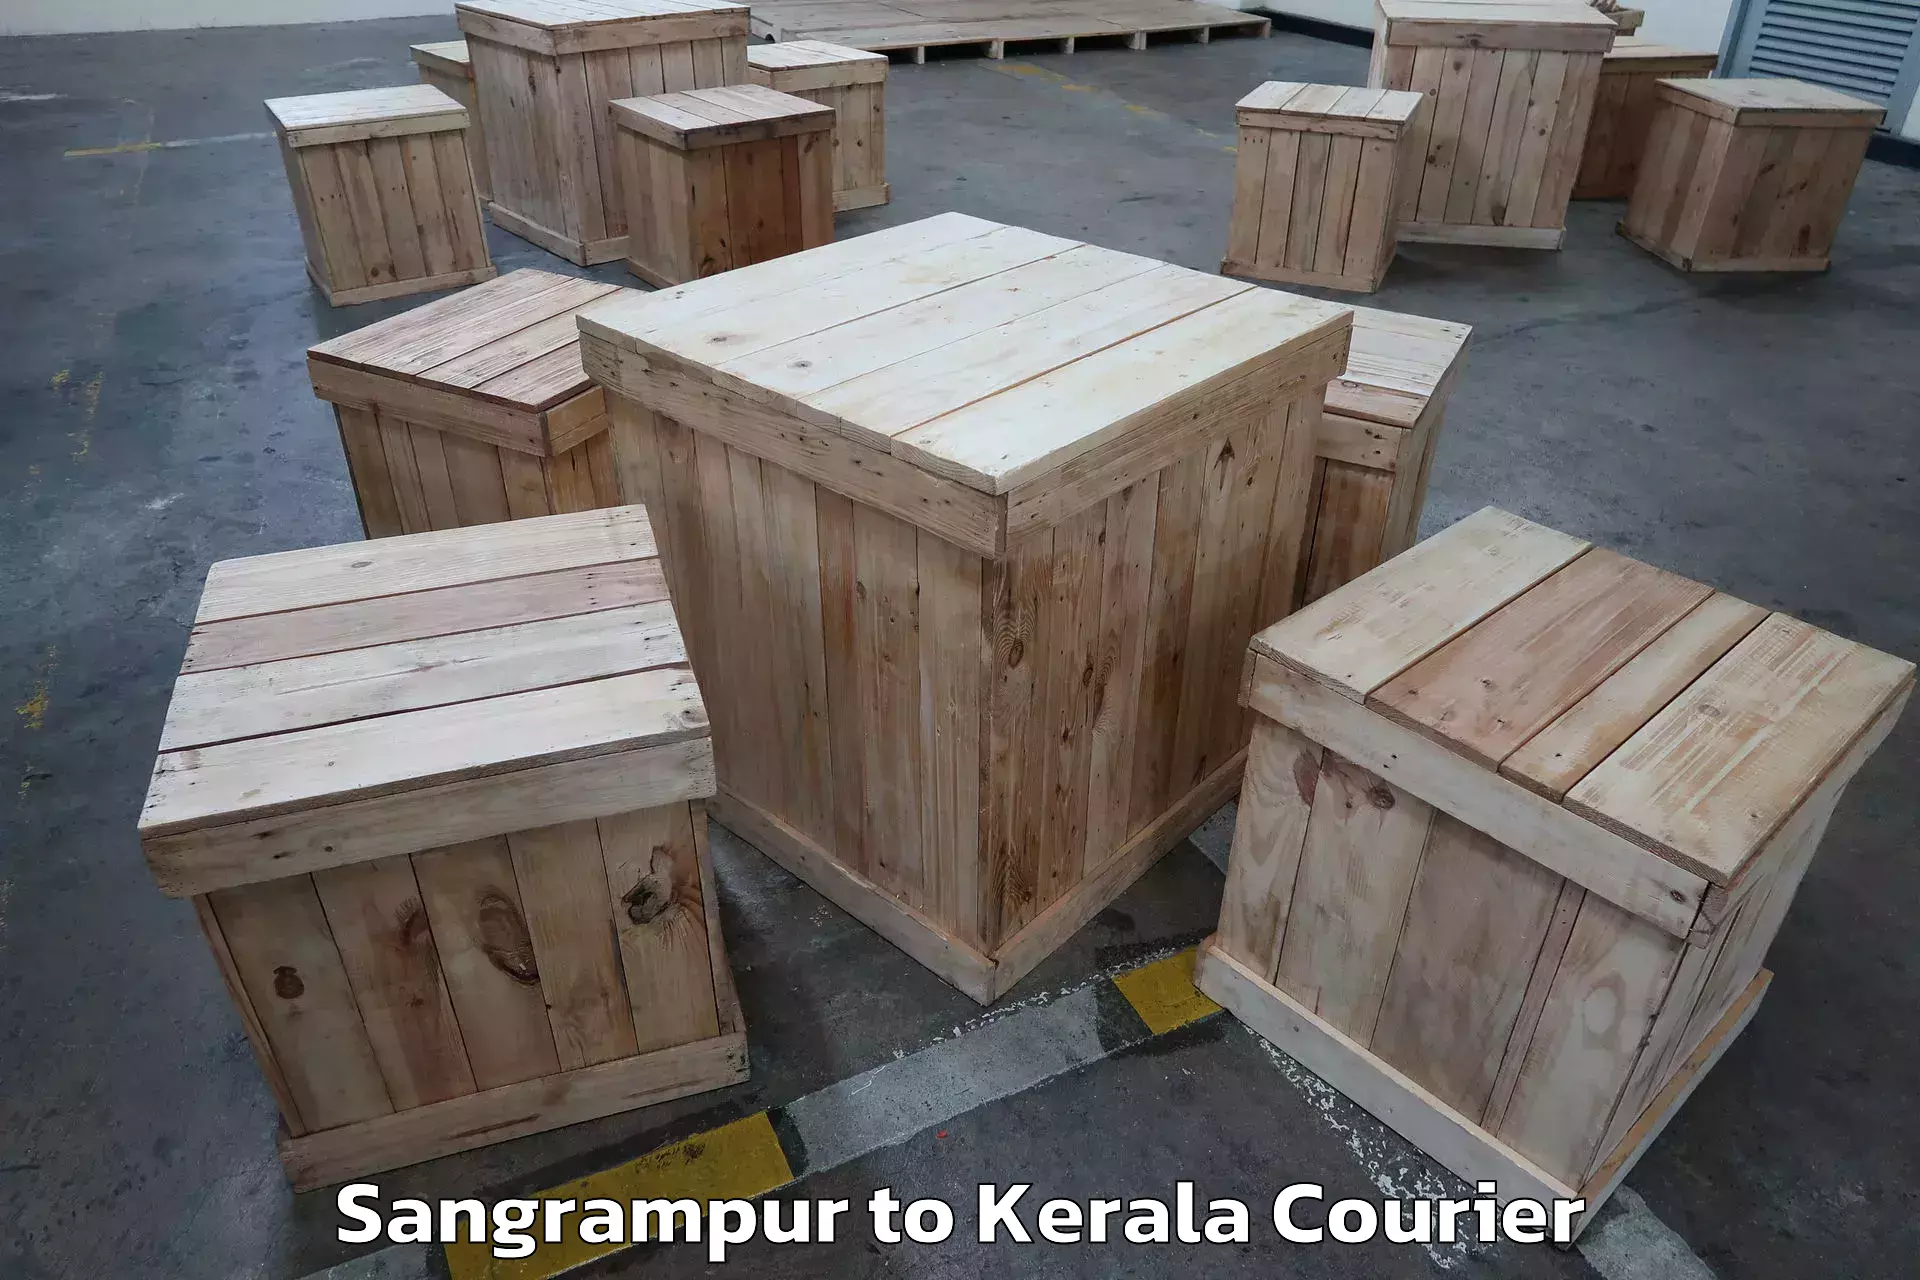 Quality relocation services Sangrampur to Kottayam